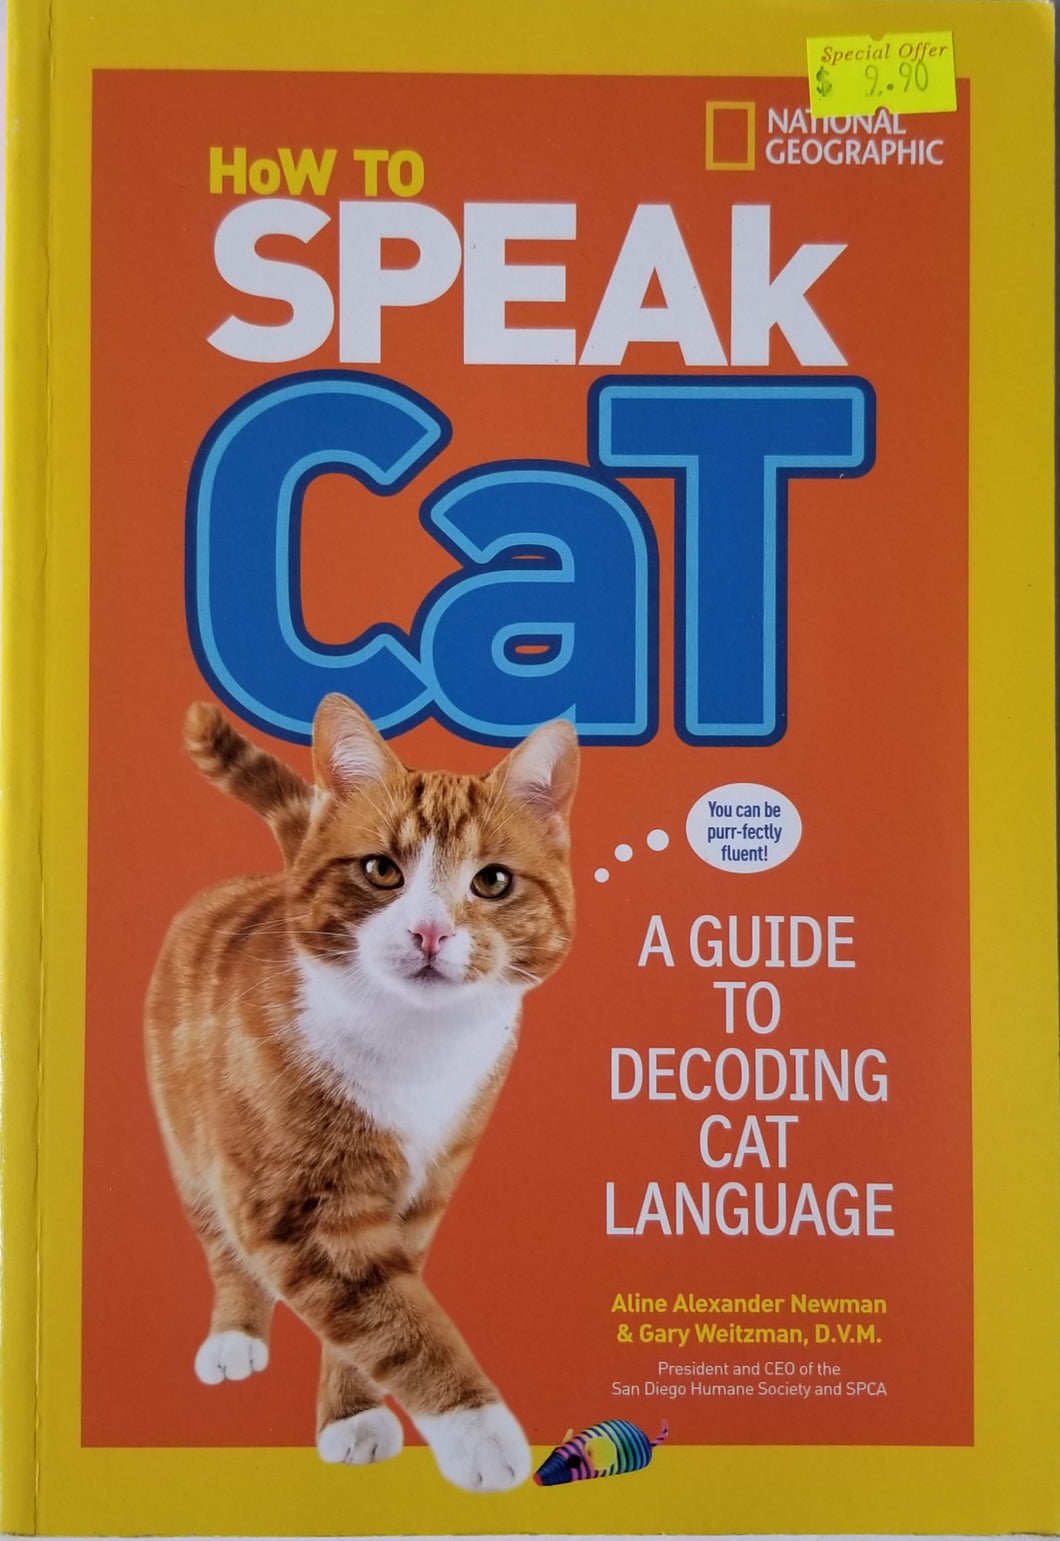 How to Speak Cat : A Guide to Decoding Cat Language - Aline Alexander Newman/National Geographic Kid